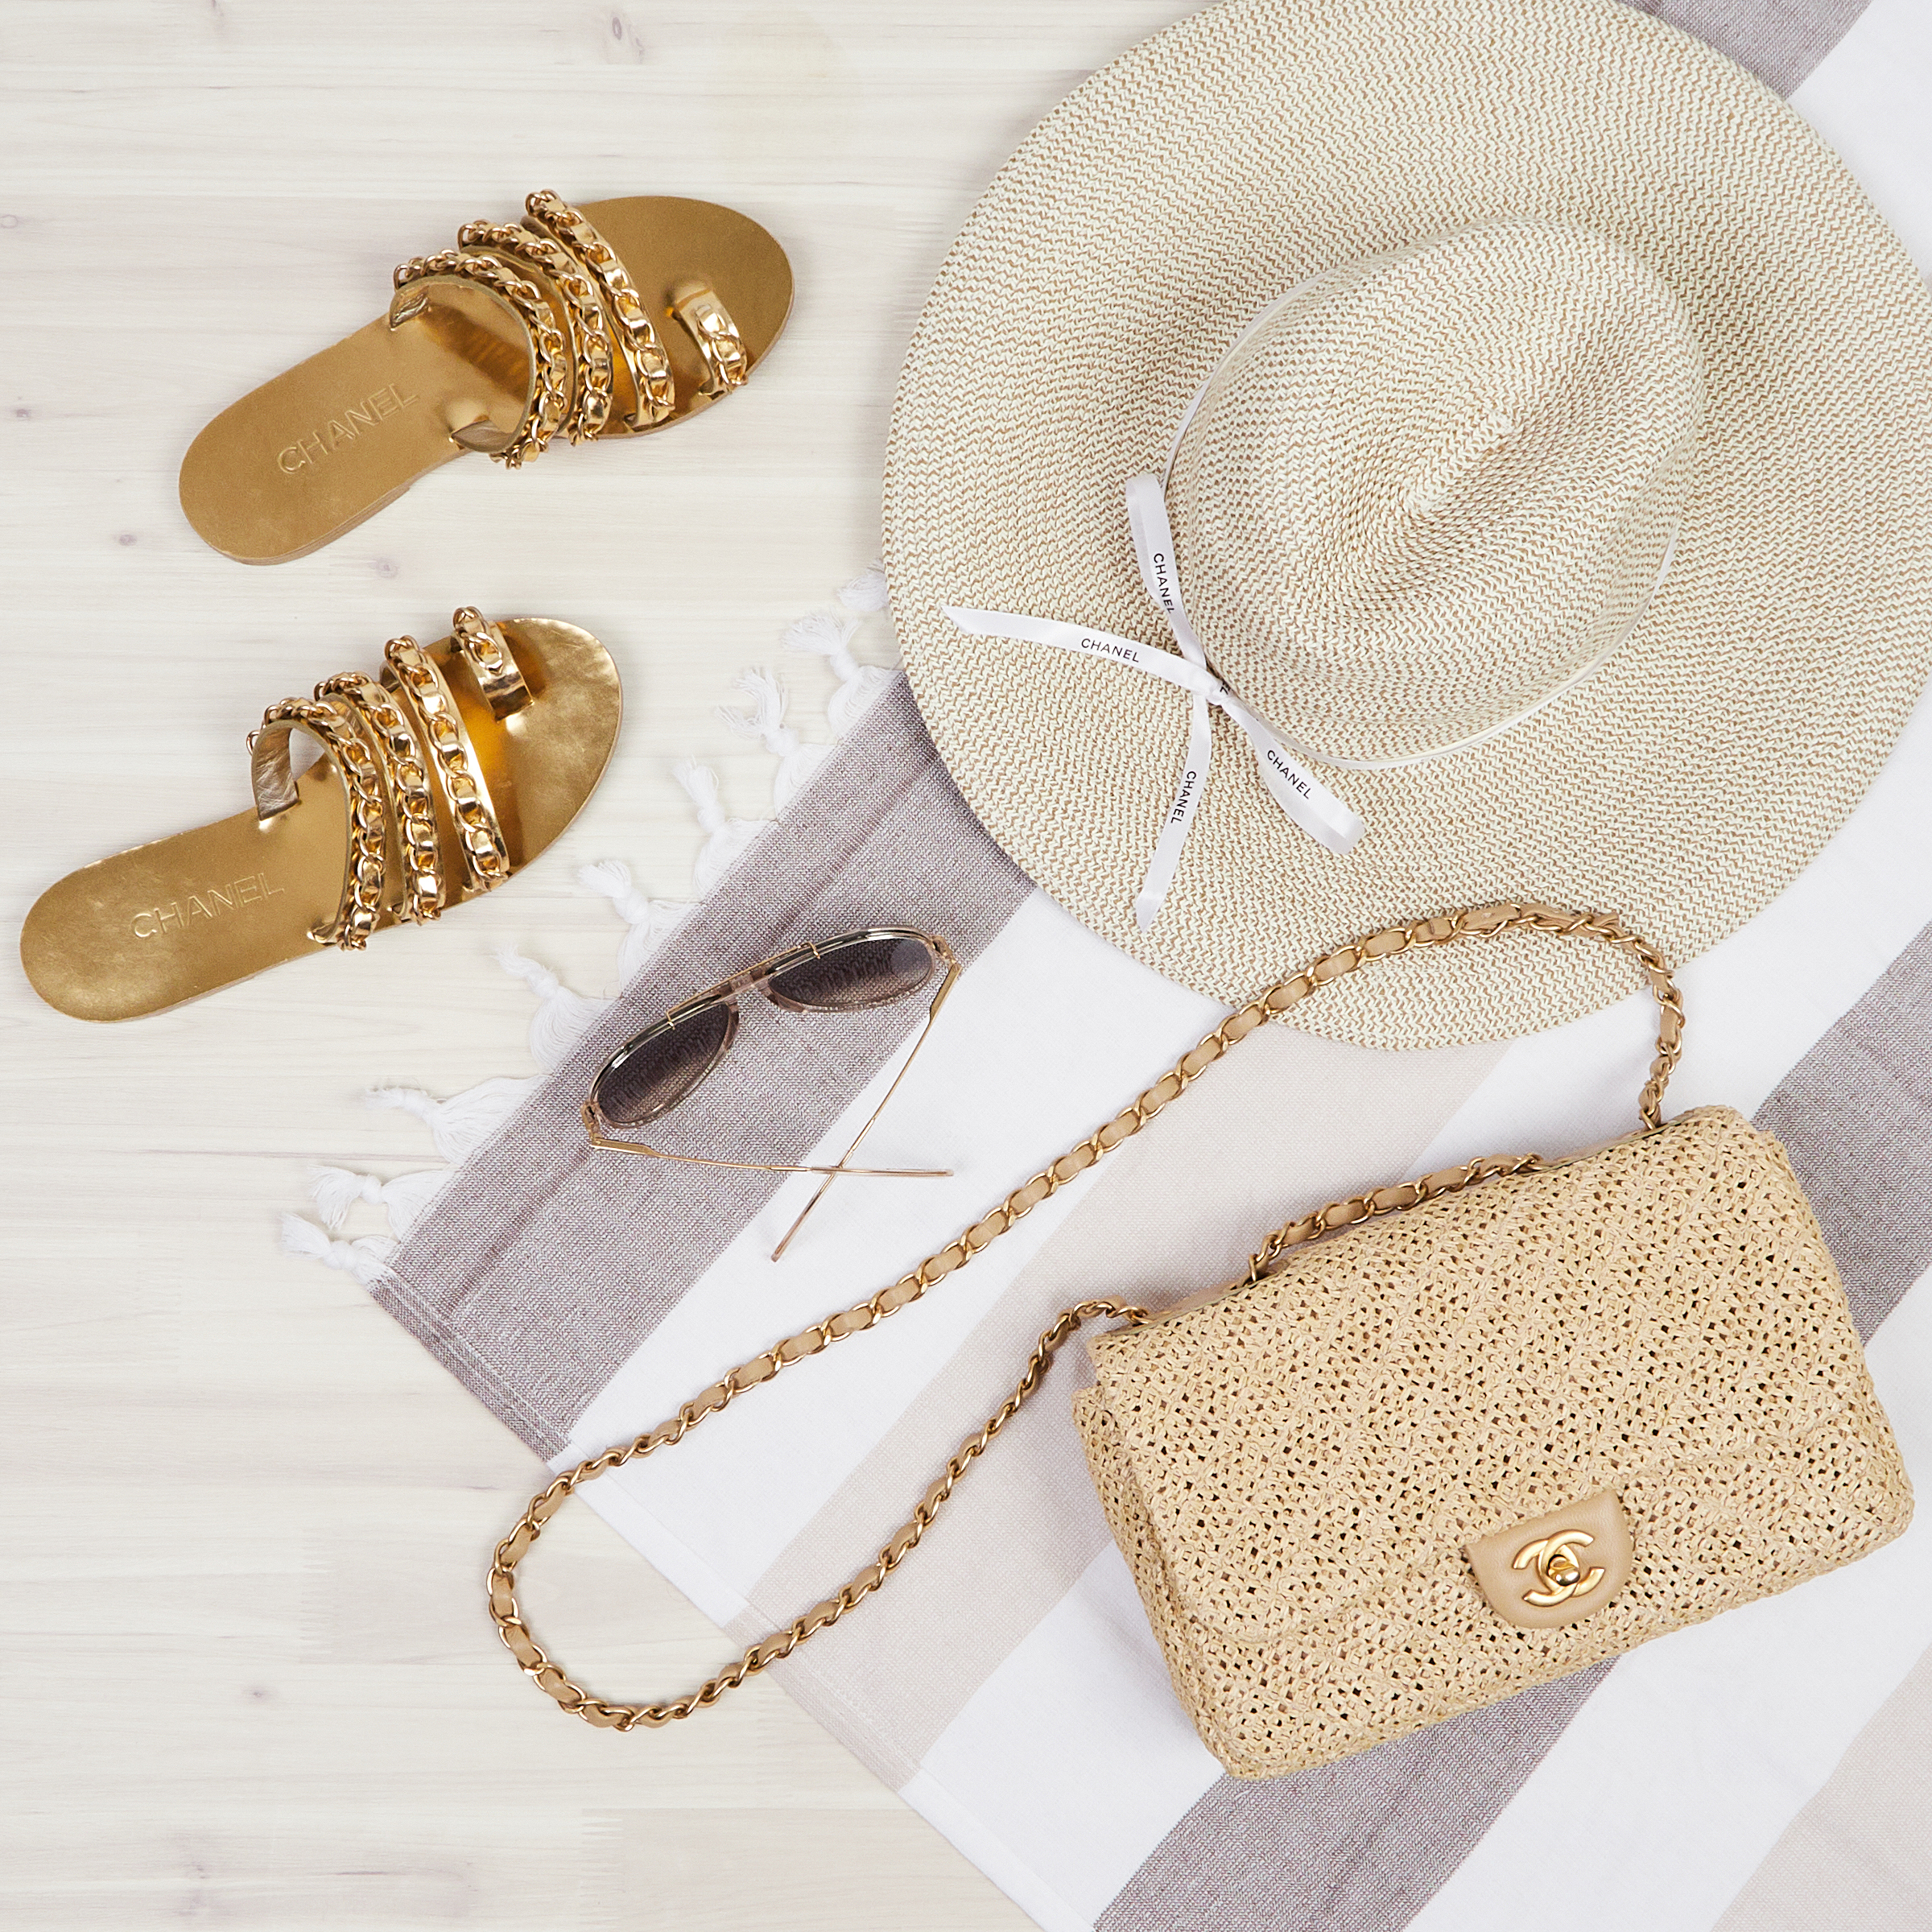 The iconic Chanel look for a resort getaway in the French Riveria: Chanel straw hat, Classic Flap bag, sunnies, and sandals | Shop Authenticated Pre-Owned Luxury Chanel at Yoogi's Closet